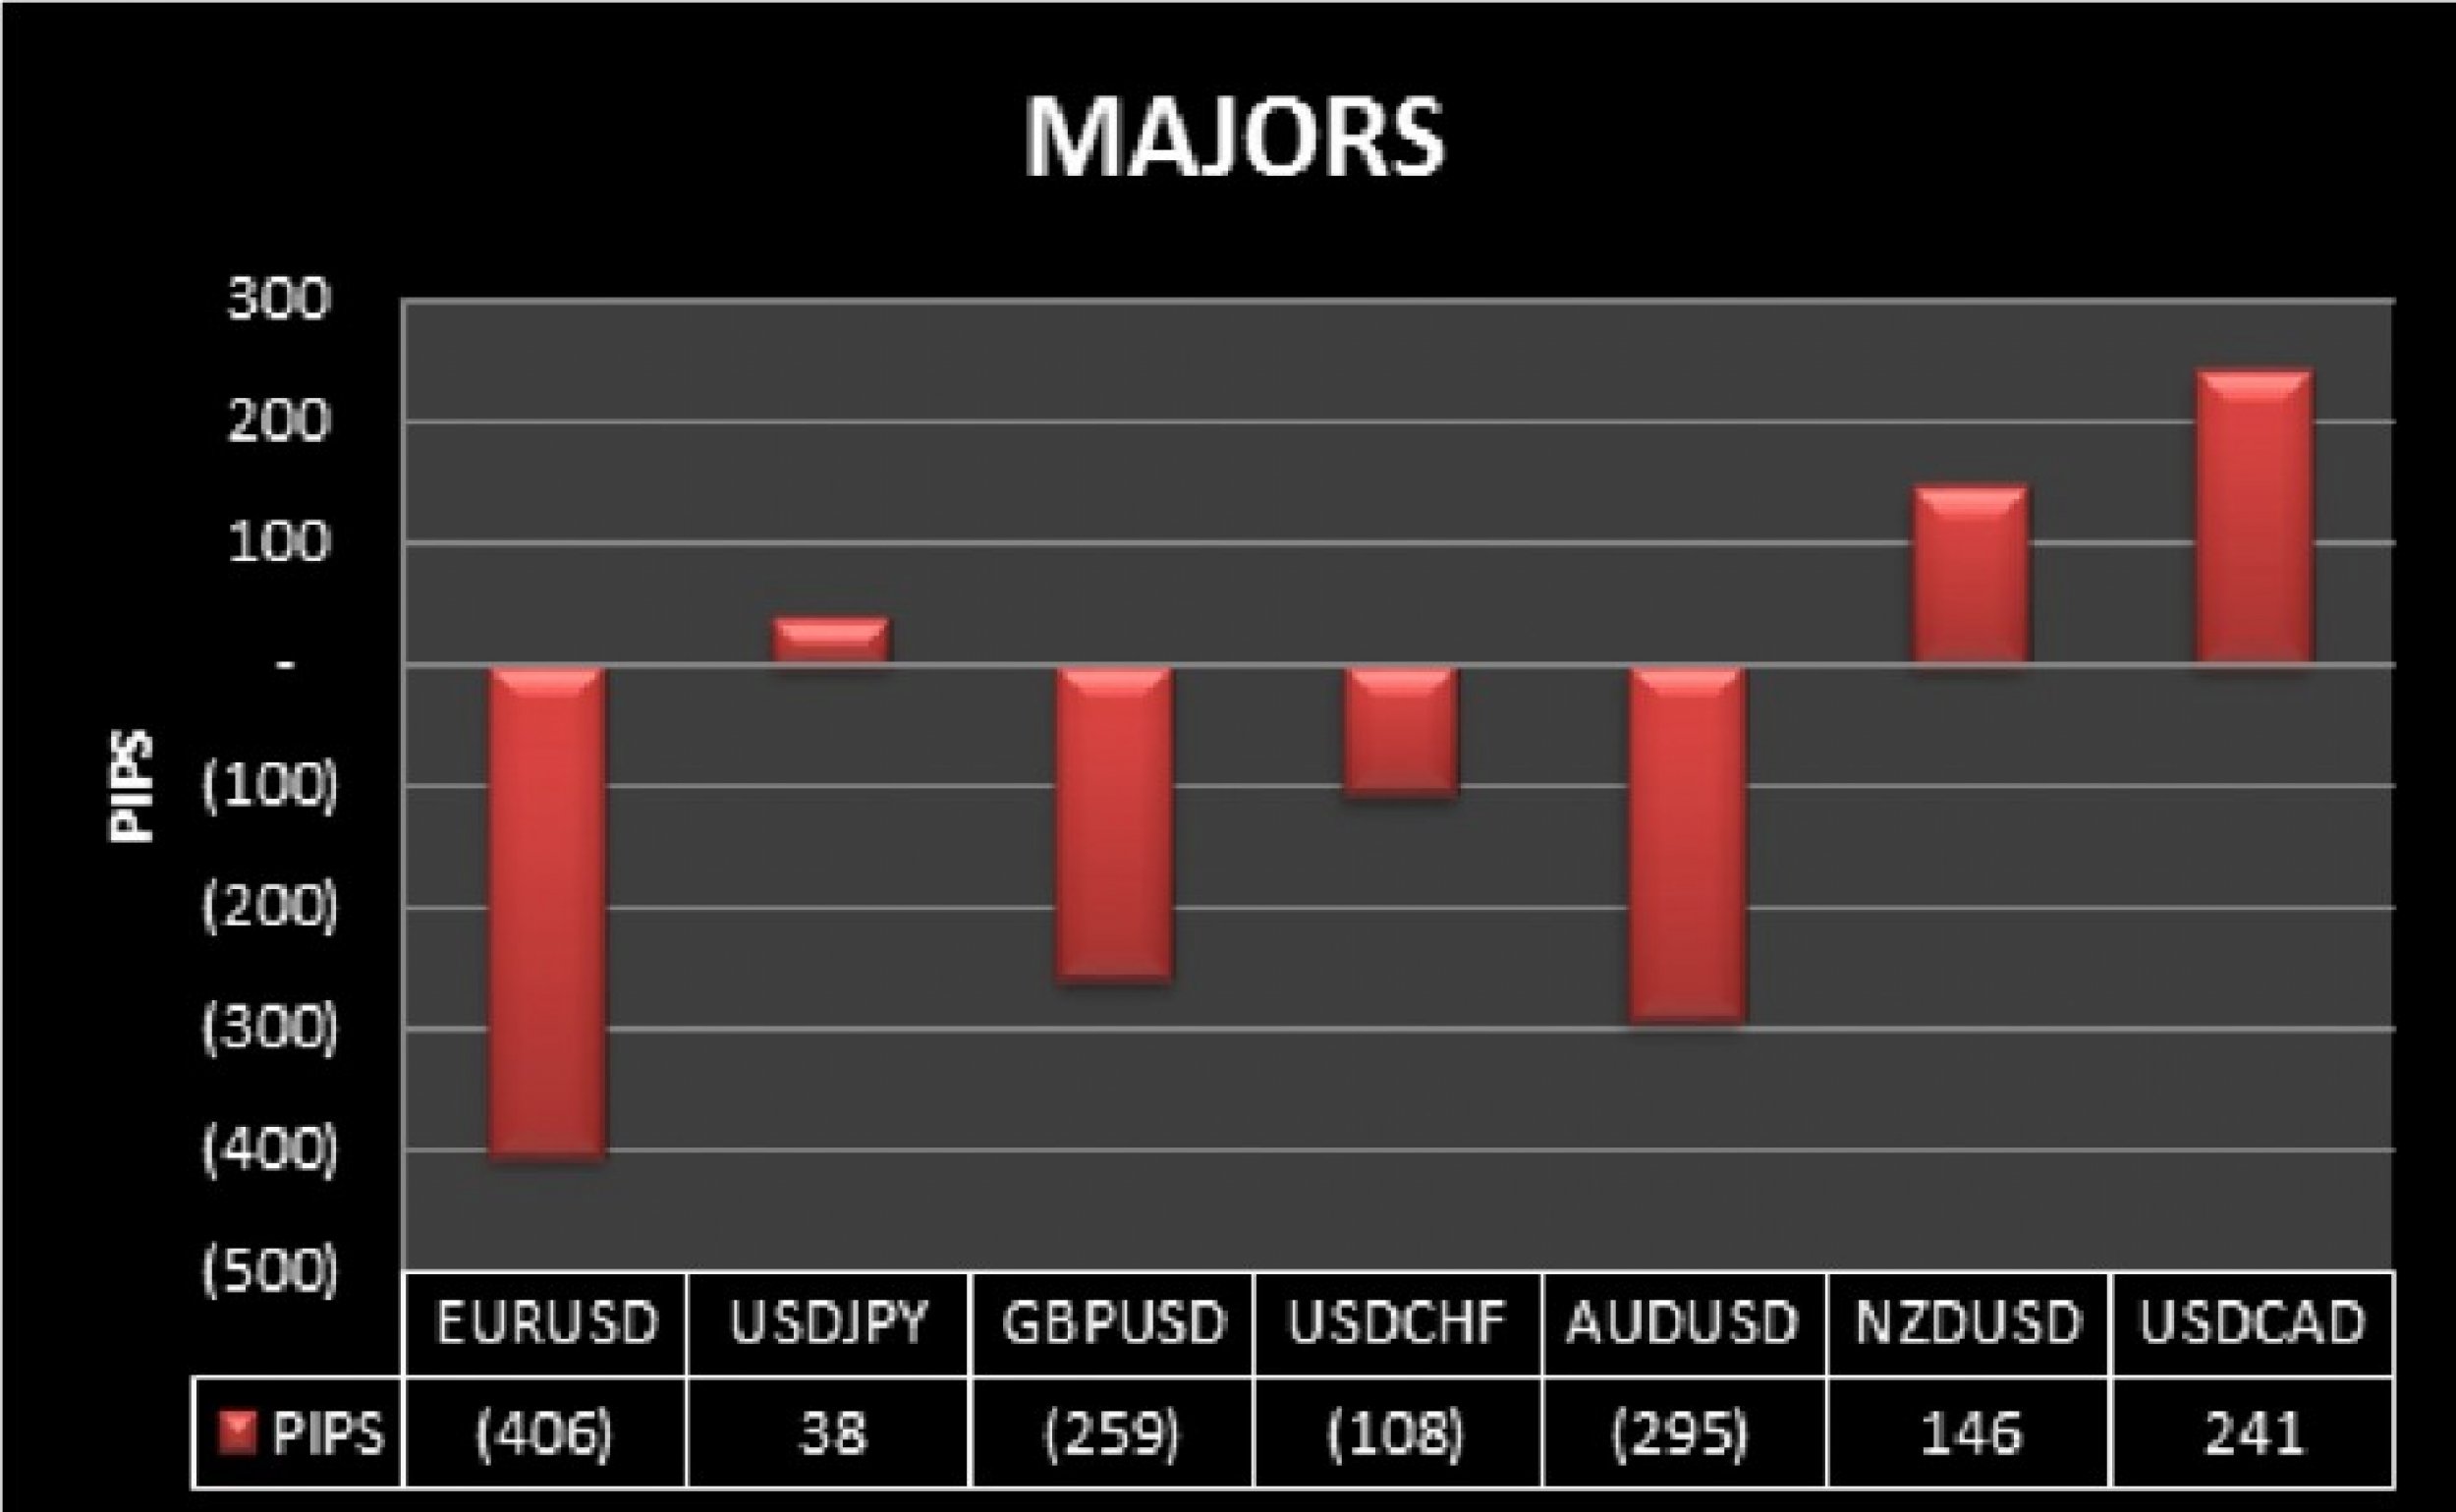 Majors - Month of May